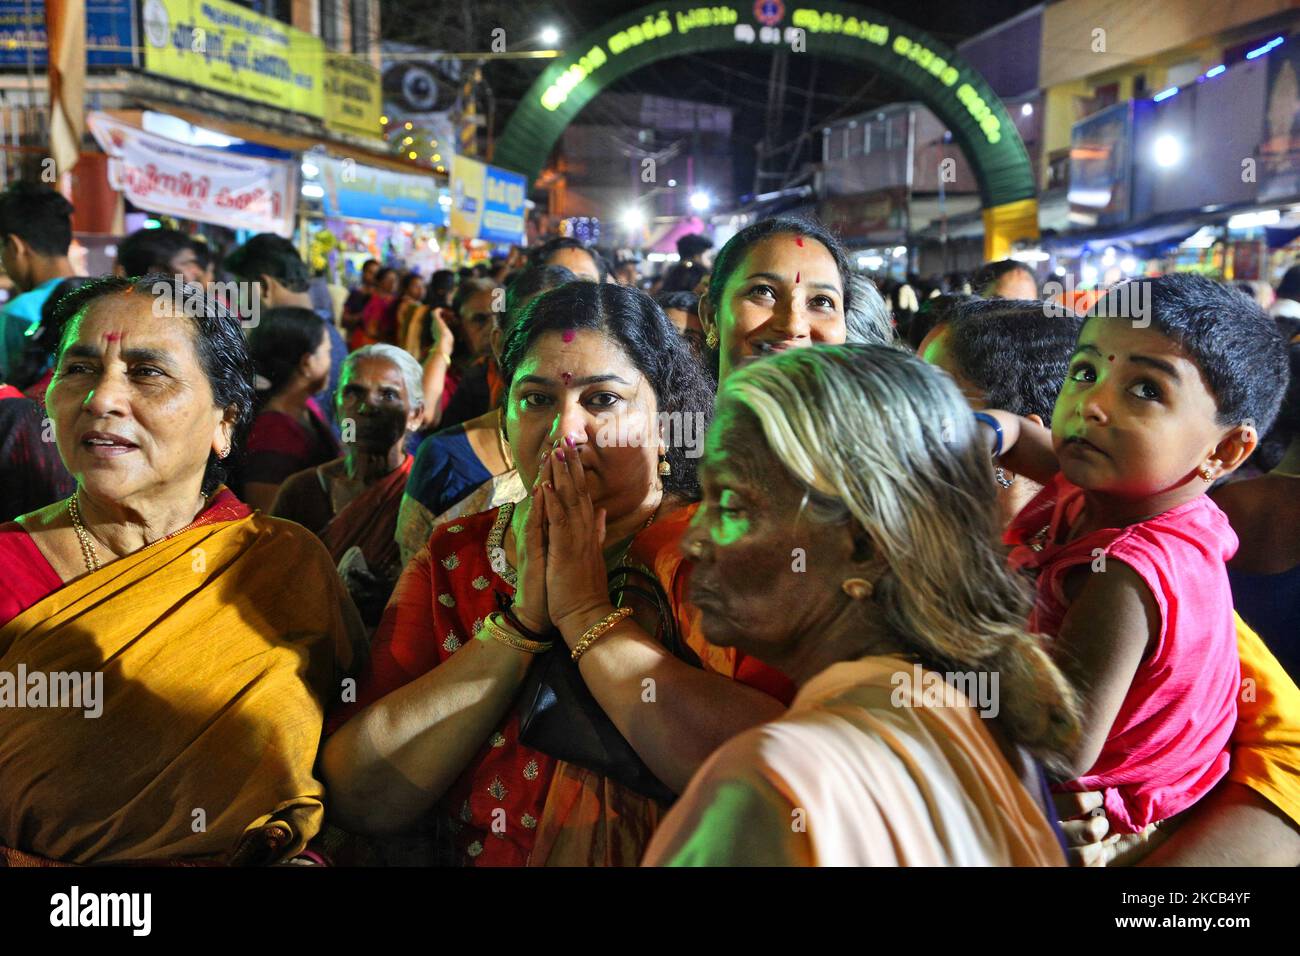 Thousands of Hindu devotees throng to the Attukal Bhagavathy Temple to offer evening prayers during the Attukal Pongala Mahotsavam Festival in the city of Thiruvananthapuram (Trivandrum), Kerala, India, on February 19, 2019. The Attukal Pongala Mahotsavam Festival is celebrated by millions Hindu women each year. During this festival women prepare Pongala (rice cooked with jaggery, ghee, coconut as well as other ingredients) in the open in small pots to please the Goddess Attukal Devi (popularly known as Attukal Amma) who is believed to fulfill the wishes of her devotees and provide prosperity. Stock Photo